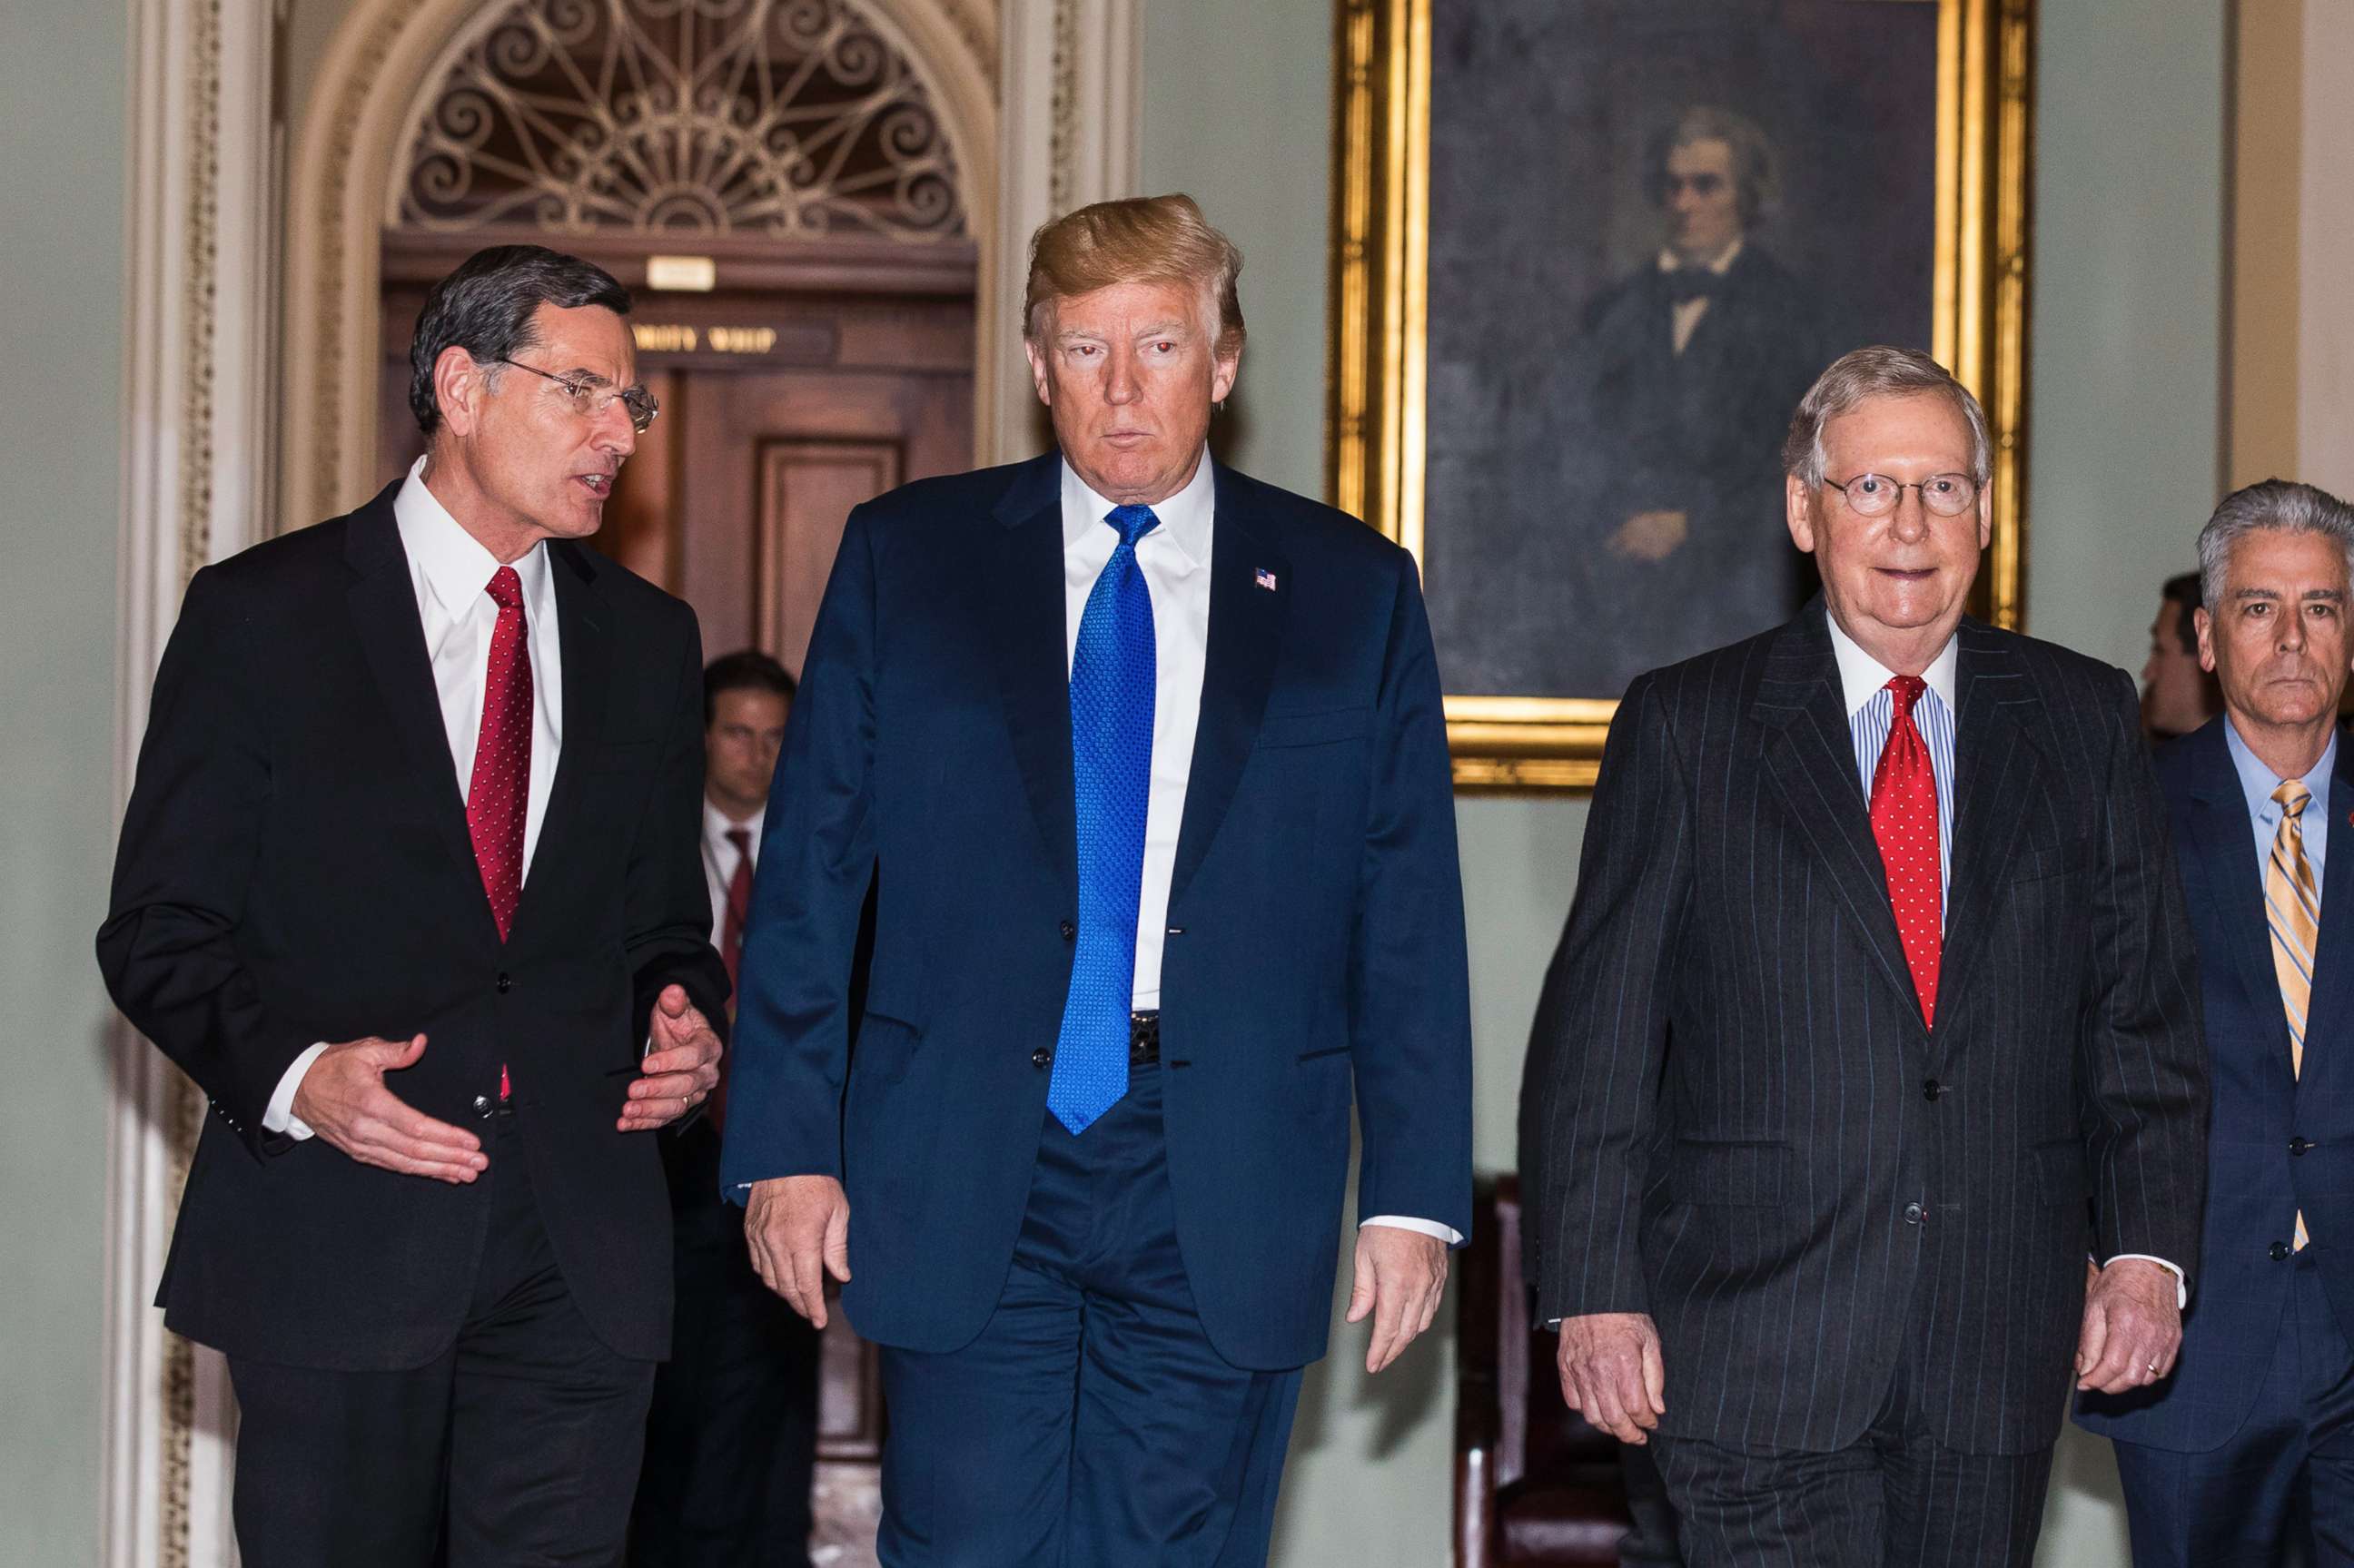 PHOTO: President Donald Trump along with Republican Senator from Wyoming John Barrasso (L) and Republican Senate Majority Leader from Kentucky Mitch McConnell (R), walk to a Republican Senate luncheon in the U.S. Capitol on Nov. 28 2017.